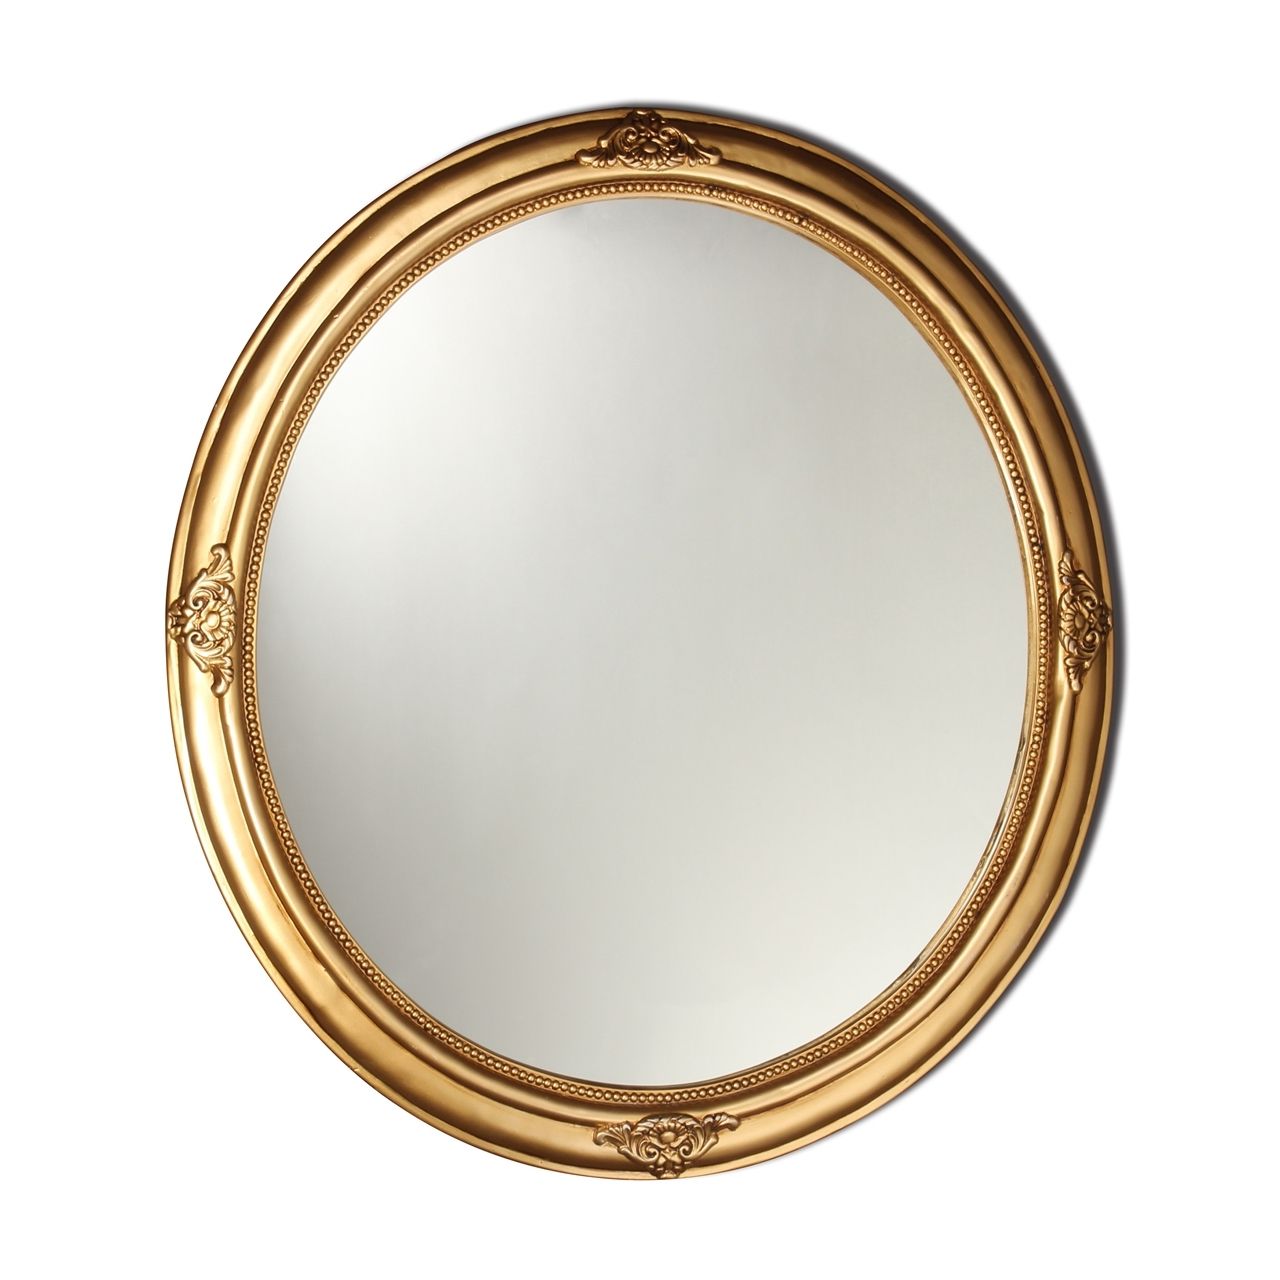 Chloe Lighting, Inc Ch7m105ag27 Fov Framed Mirror Pertaining To Preferred Oval Shaped Wall Mirrors (View 18 of 20)